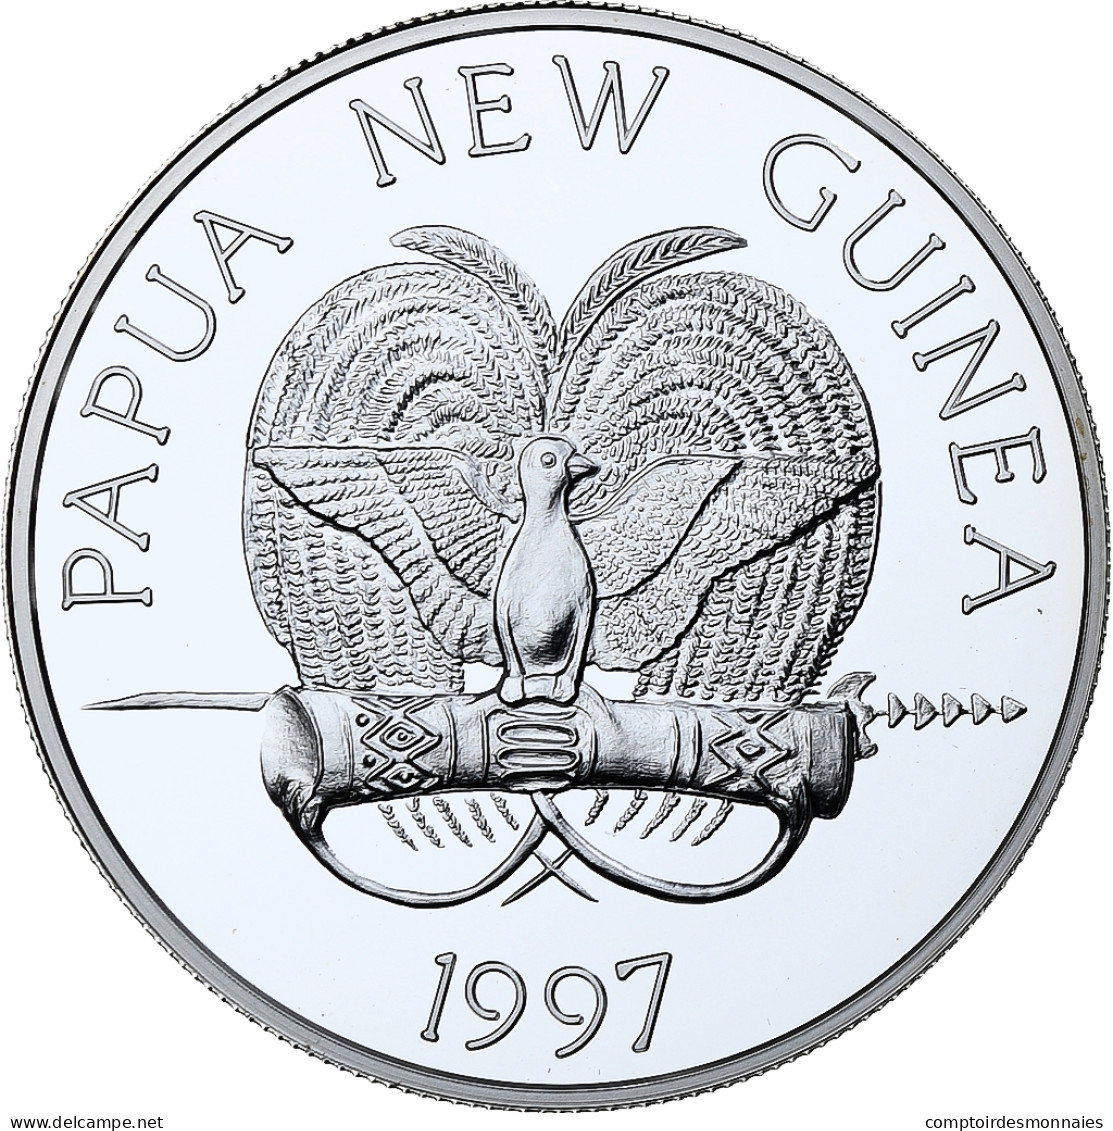 Papouasie-Nouvelle-Guinée, 5 Kina, World Cup France 1998, 1997, BE, Argent, FDC - Papua New Guinea